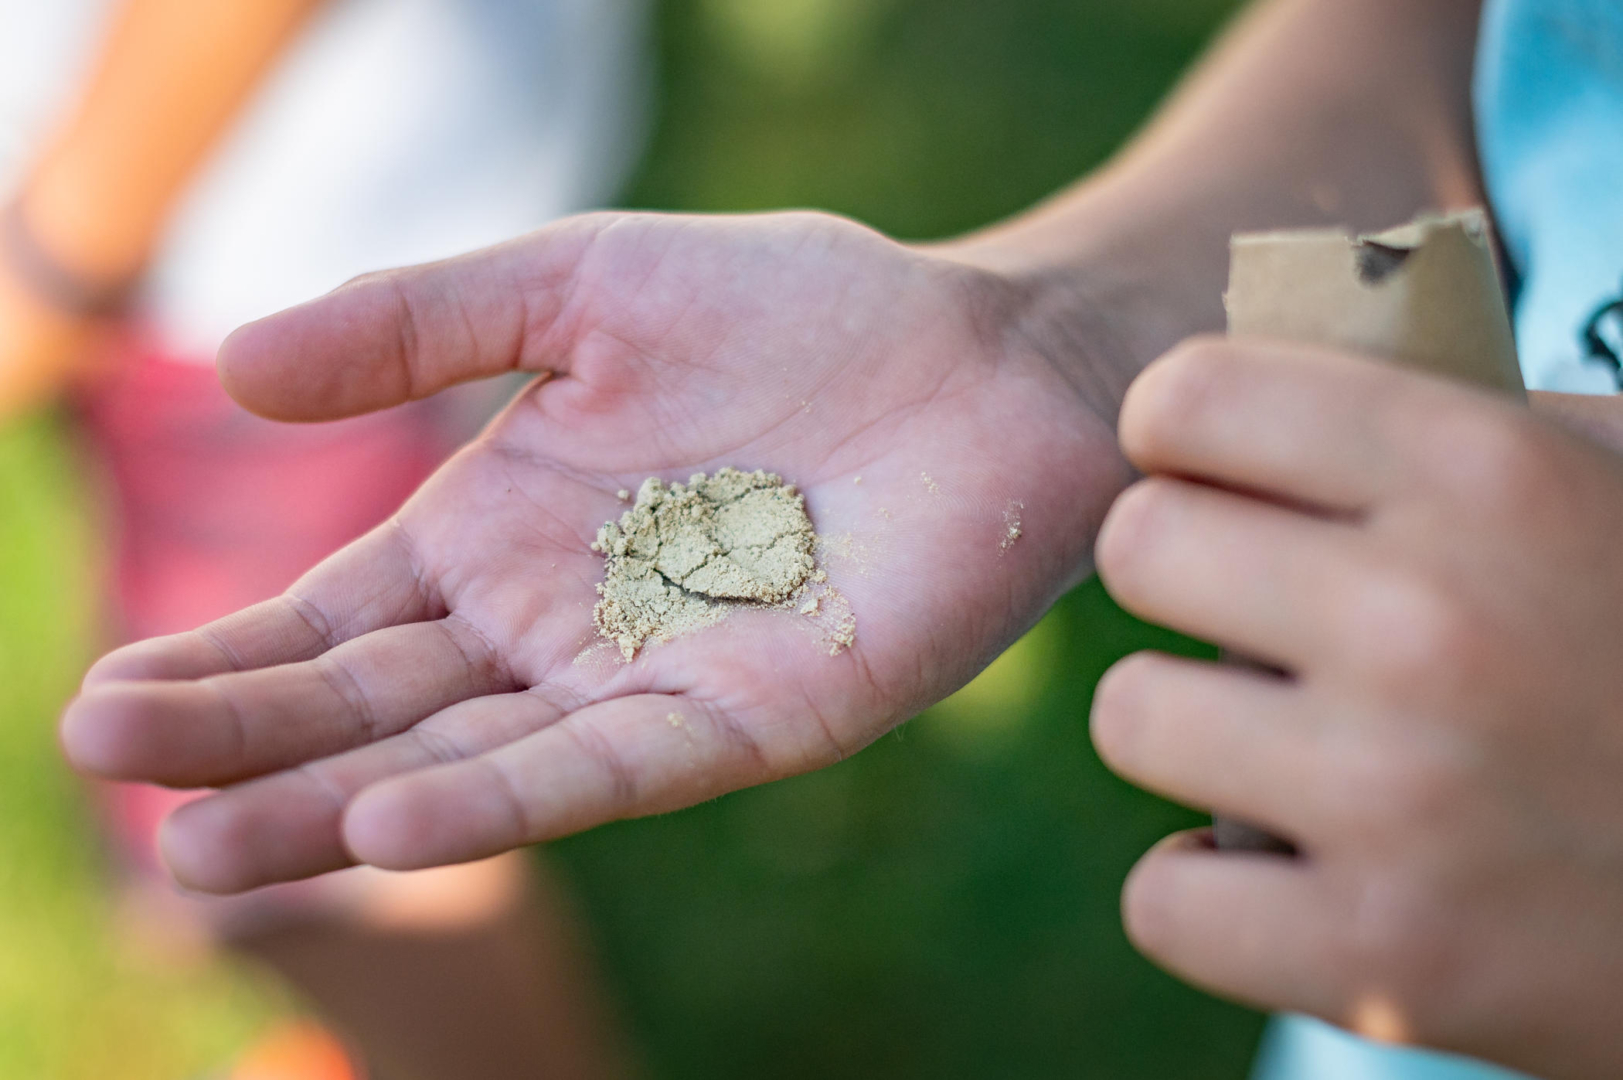 A child holds almond flour in the palm of their hand.